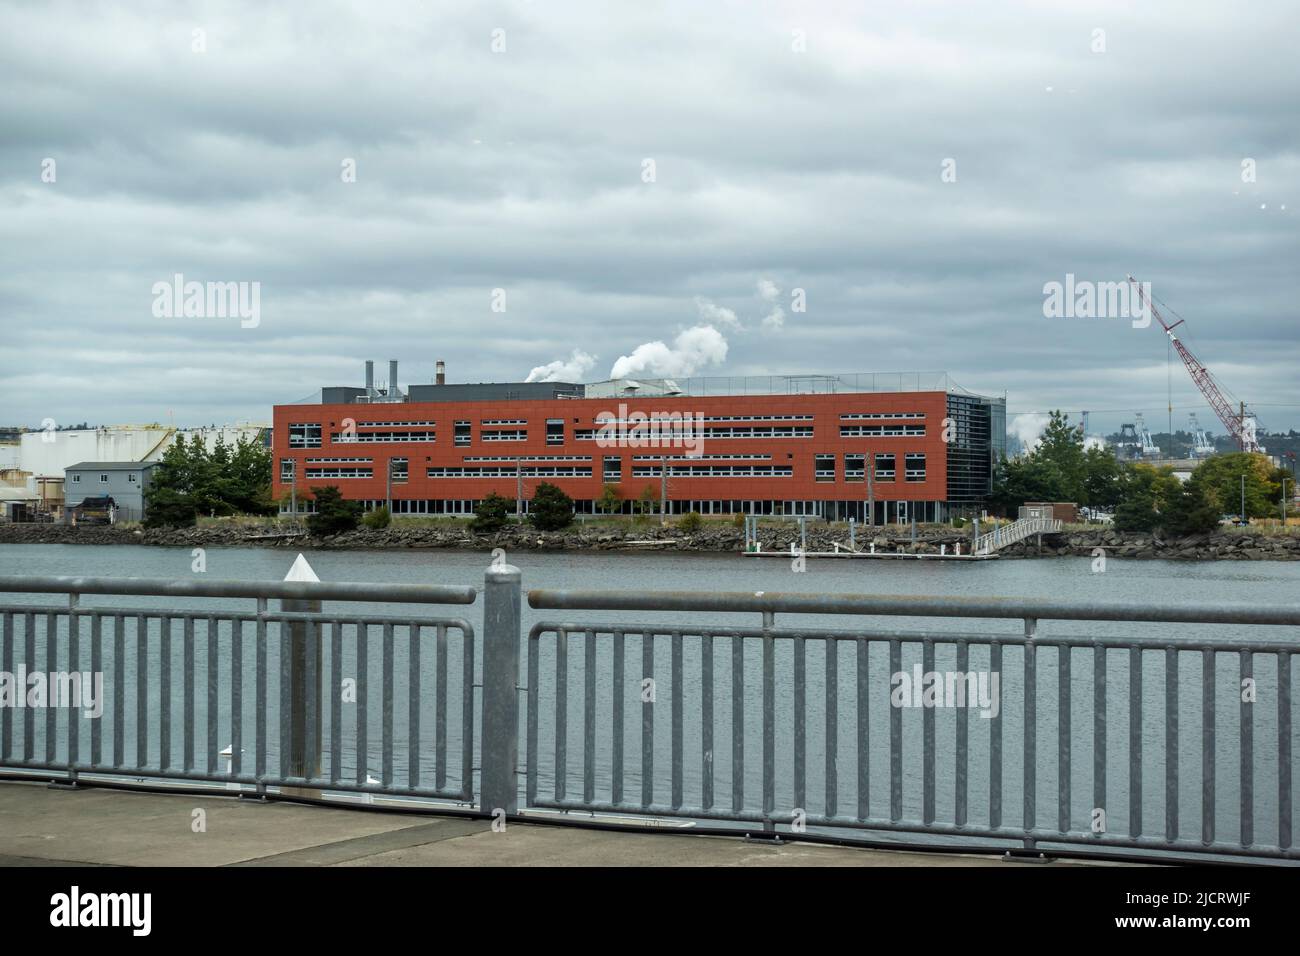 Tacoma, WA USA - circa August 2021: Wide view of the University of Washington Center for Urban Waters across the Thea Foss Waterway Stock Photo